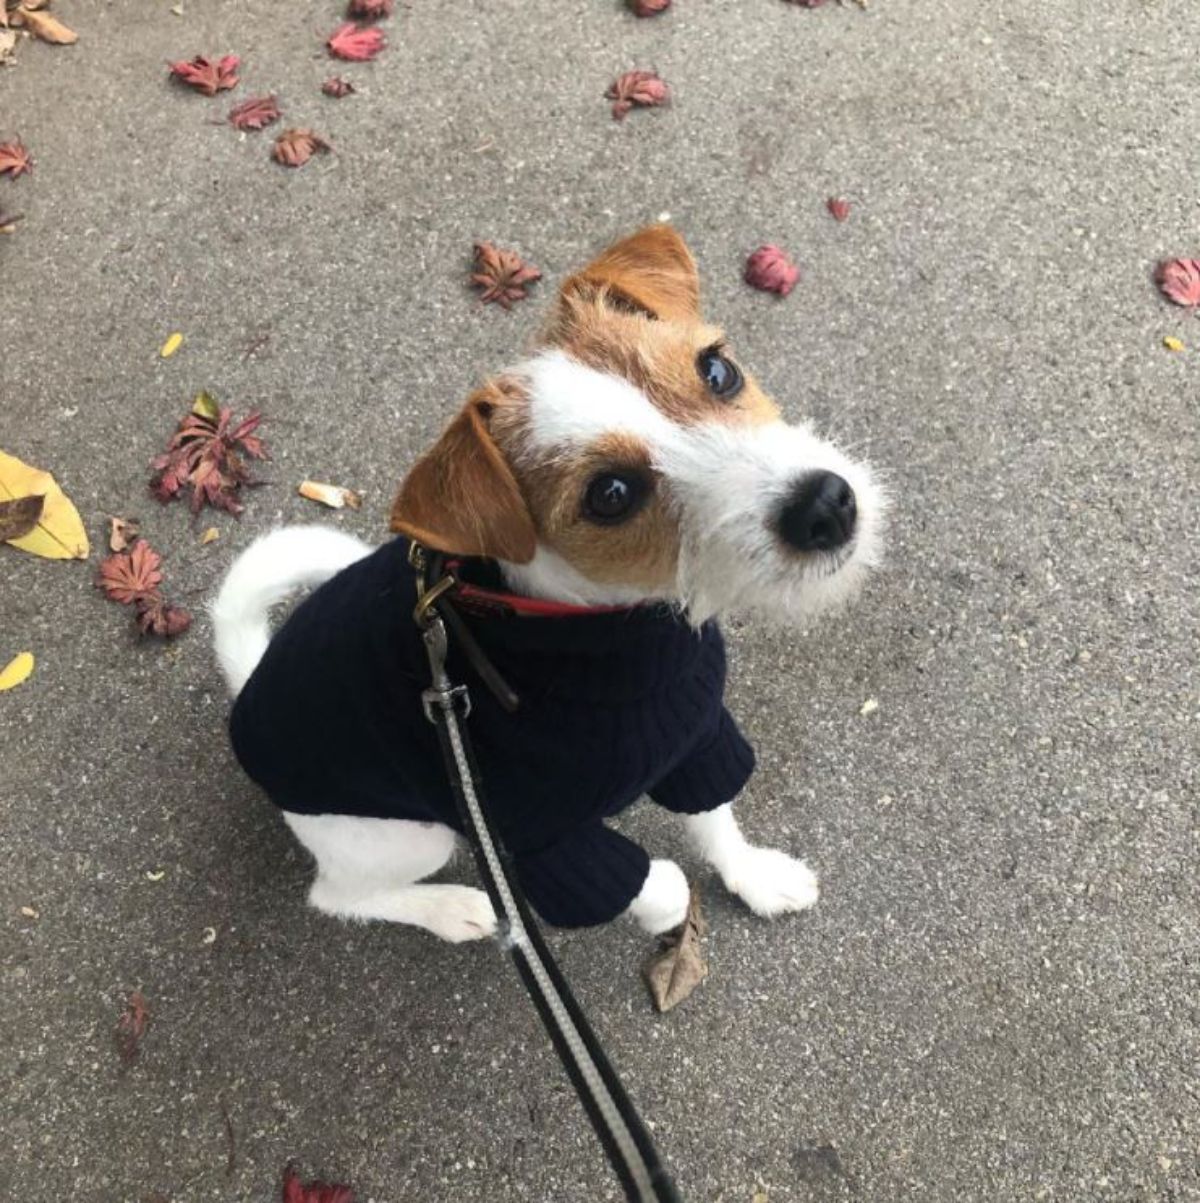 Parson Russell Terrier wearing a black shirt sitting on the ground